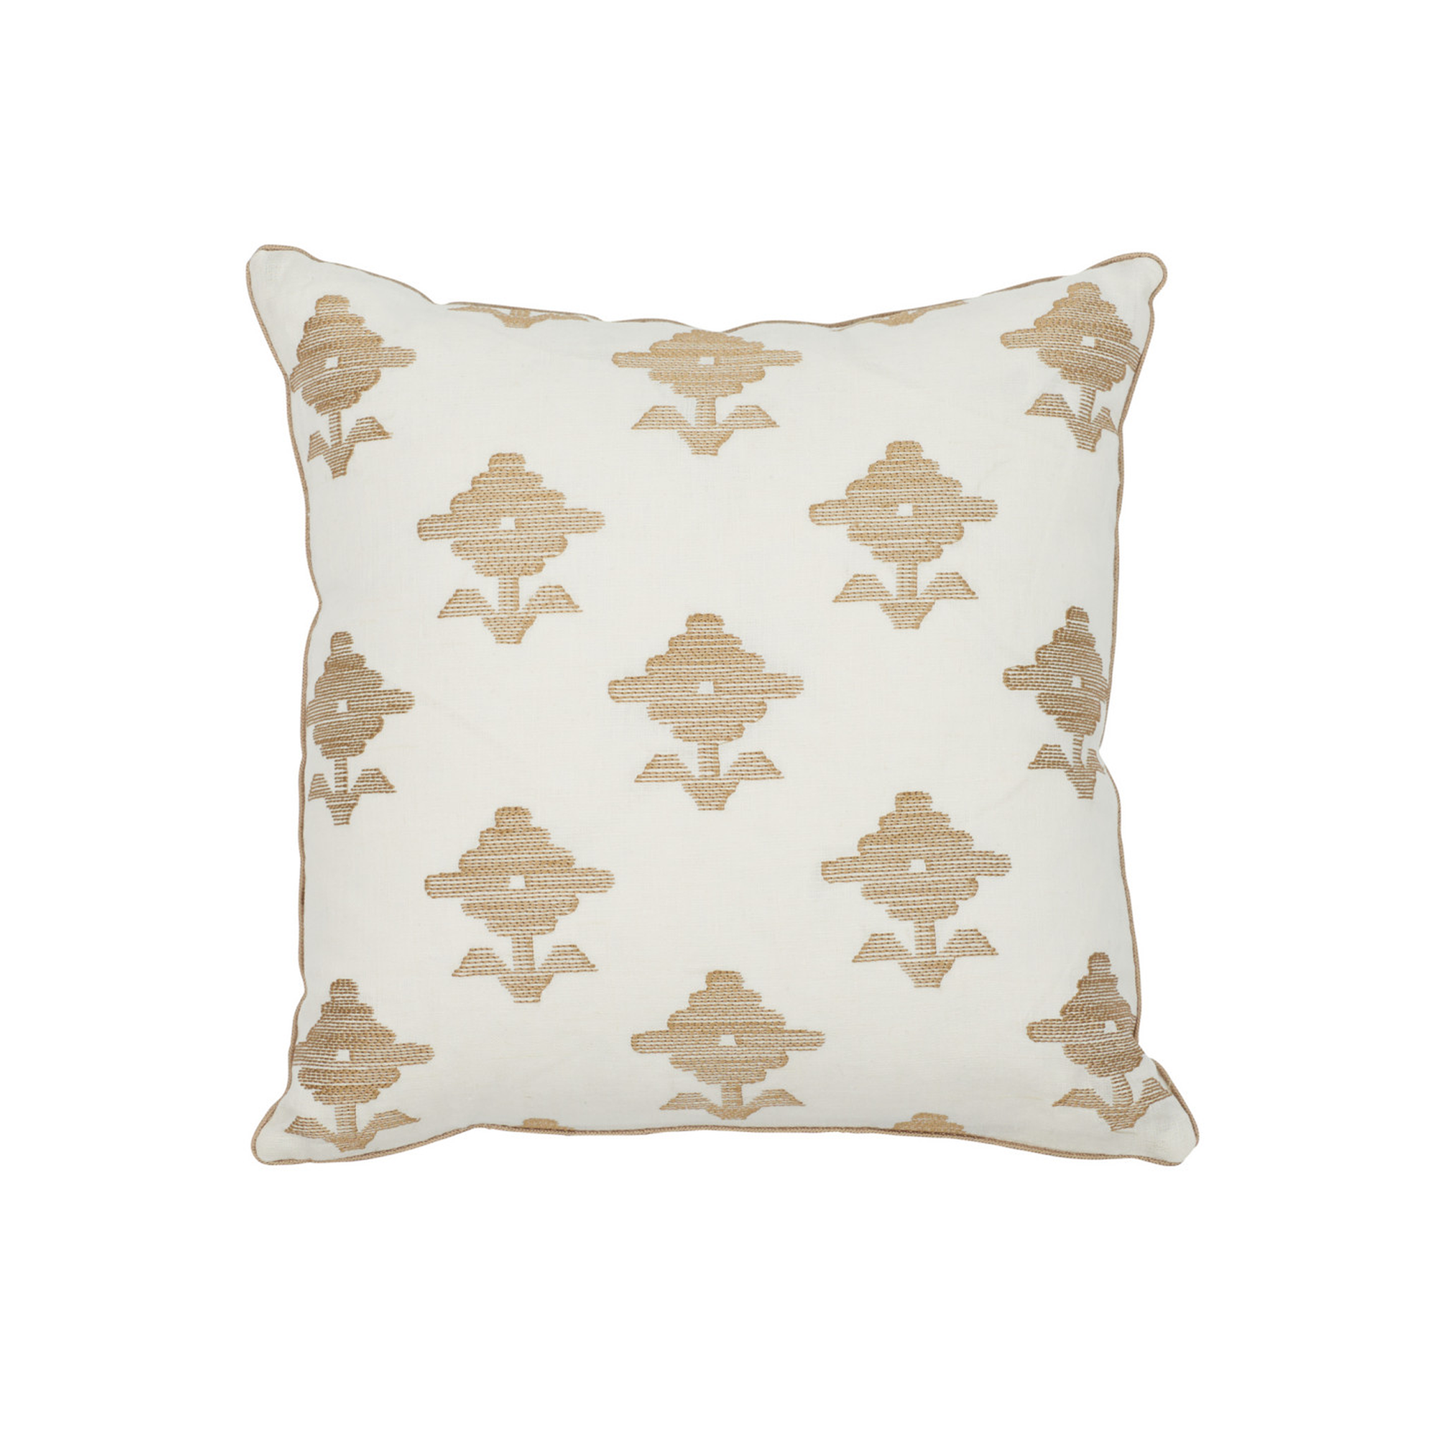 22" x 22" Pillow - Rubia Embroidery Ivory